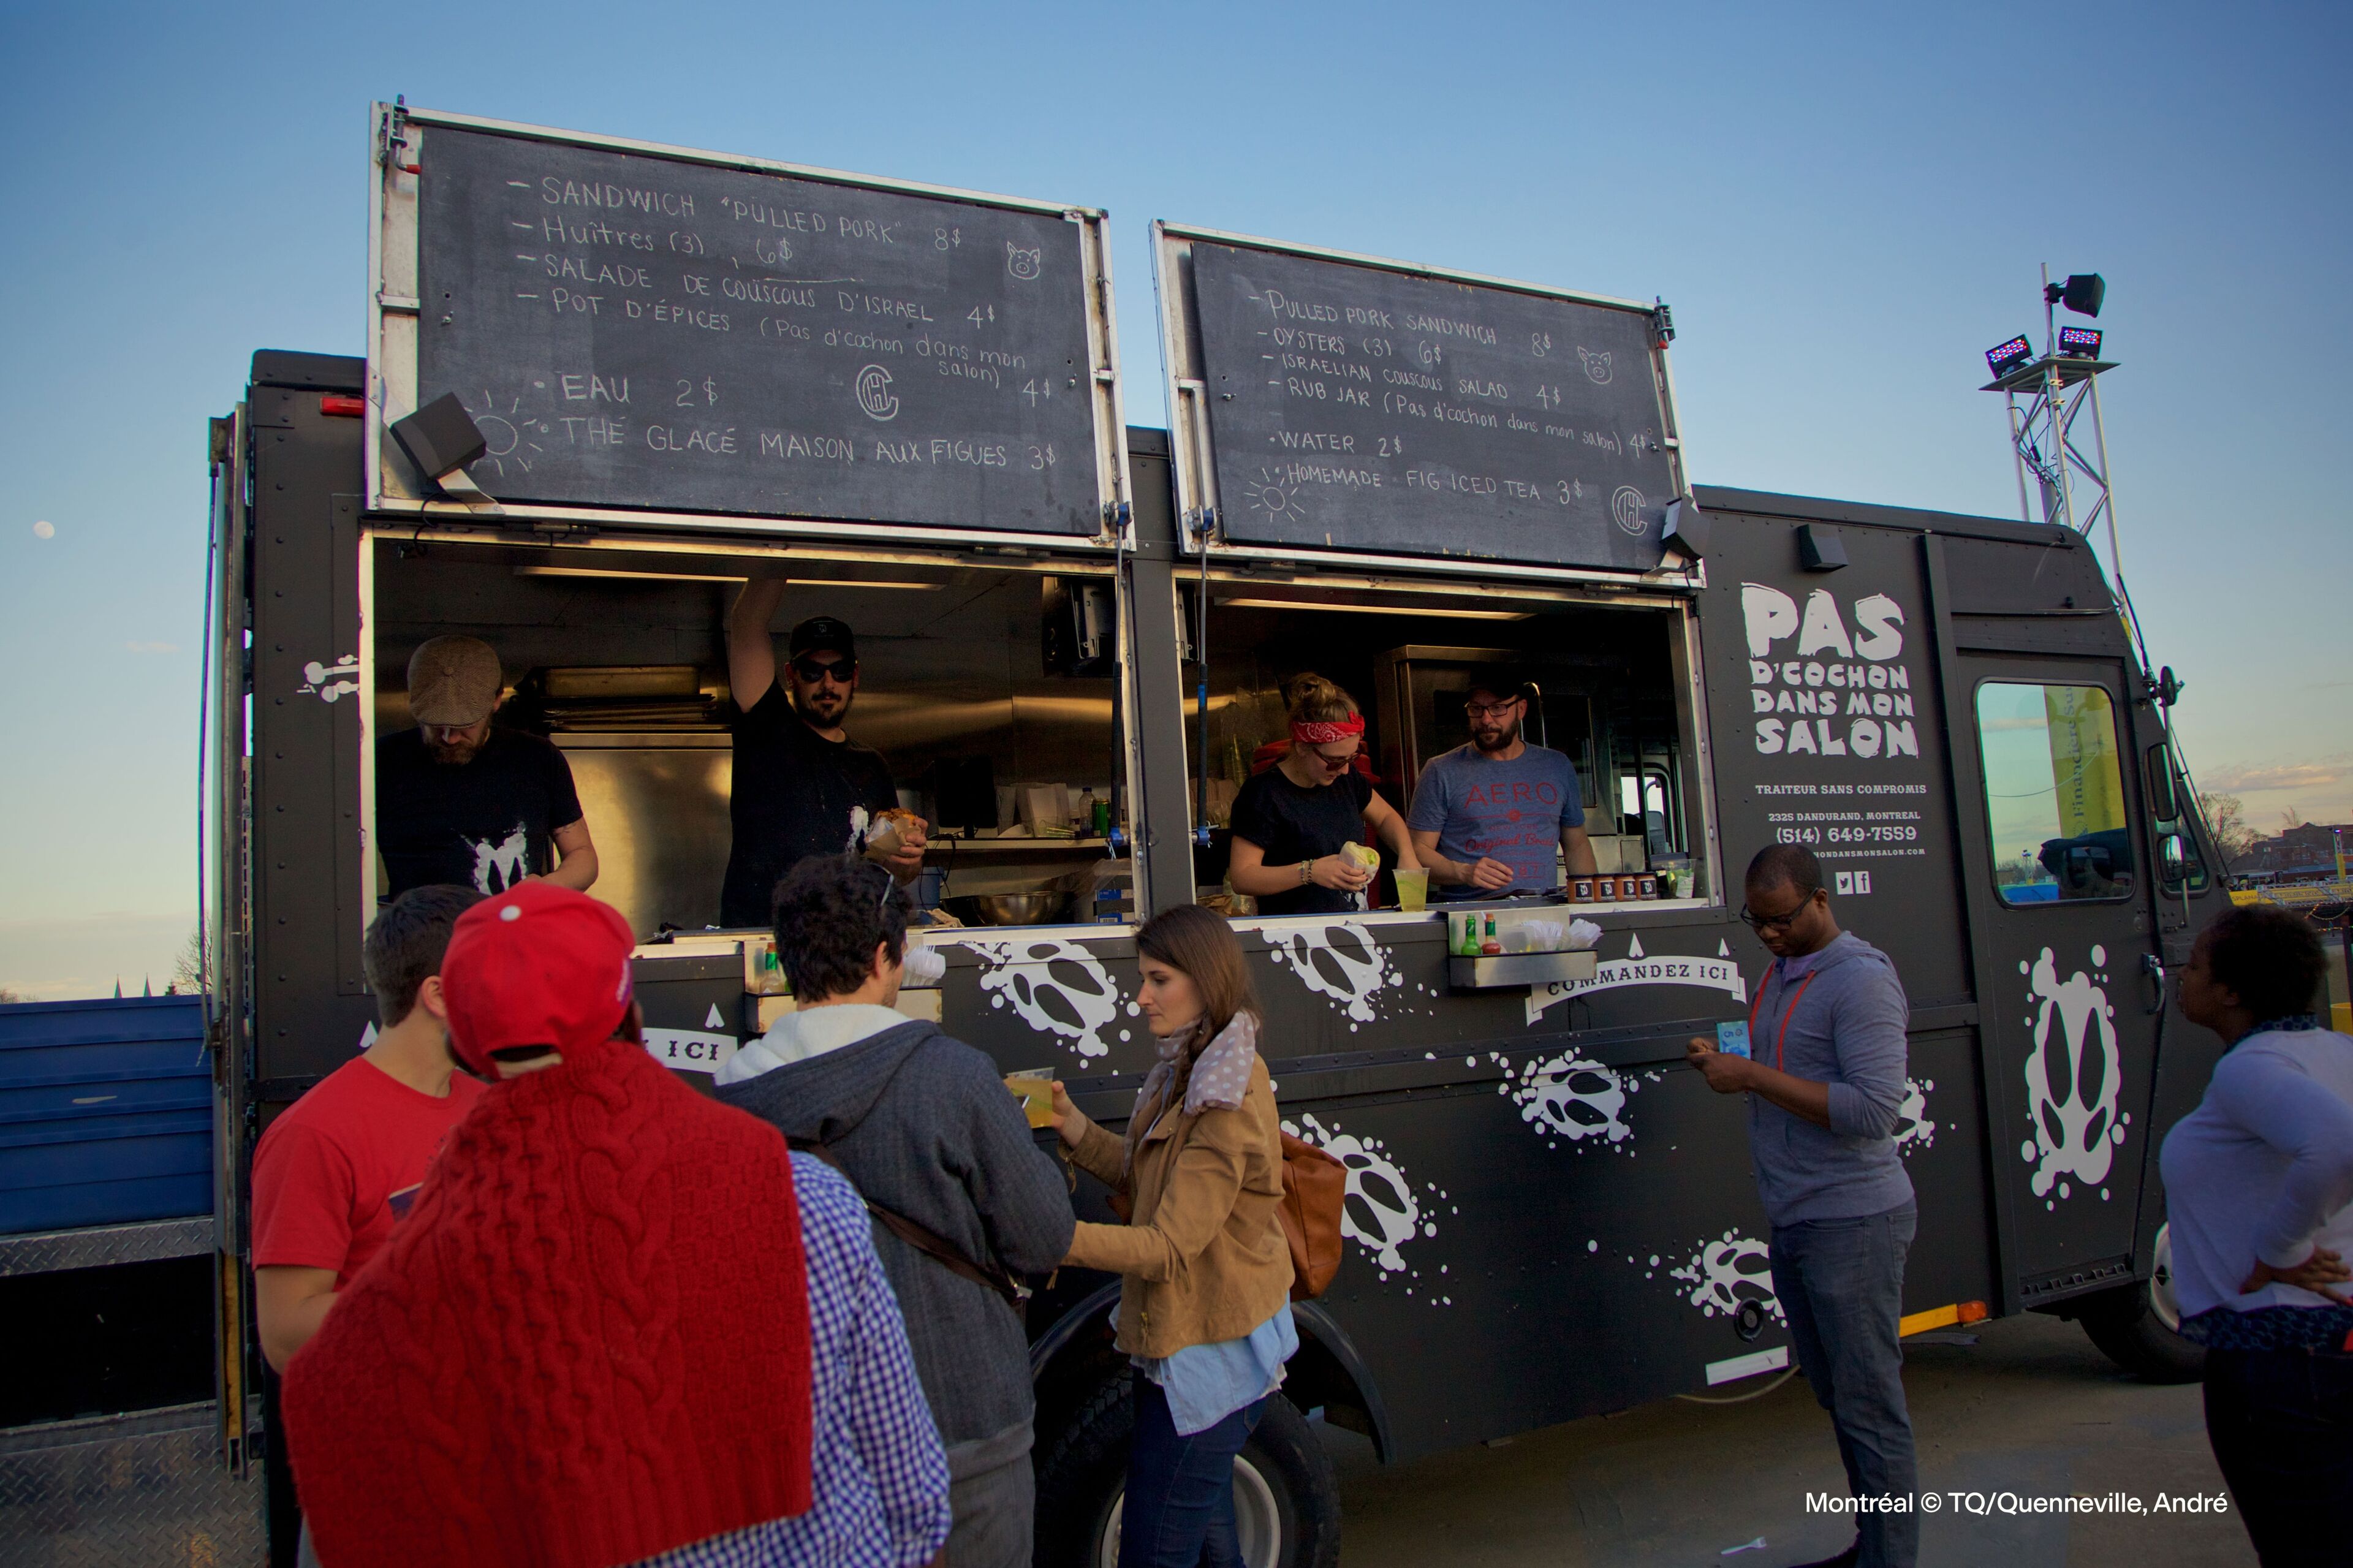 Customers queuing at a food truck serving various dishes and beverages during a sunny evening.